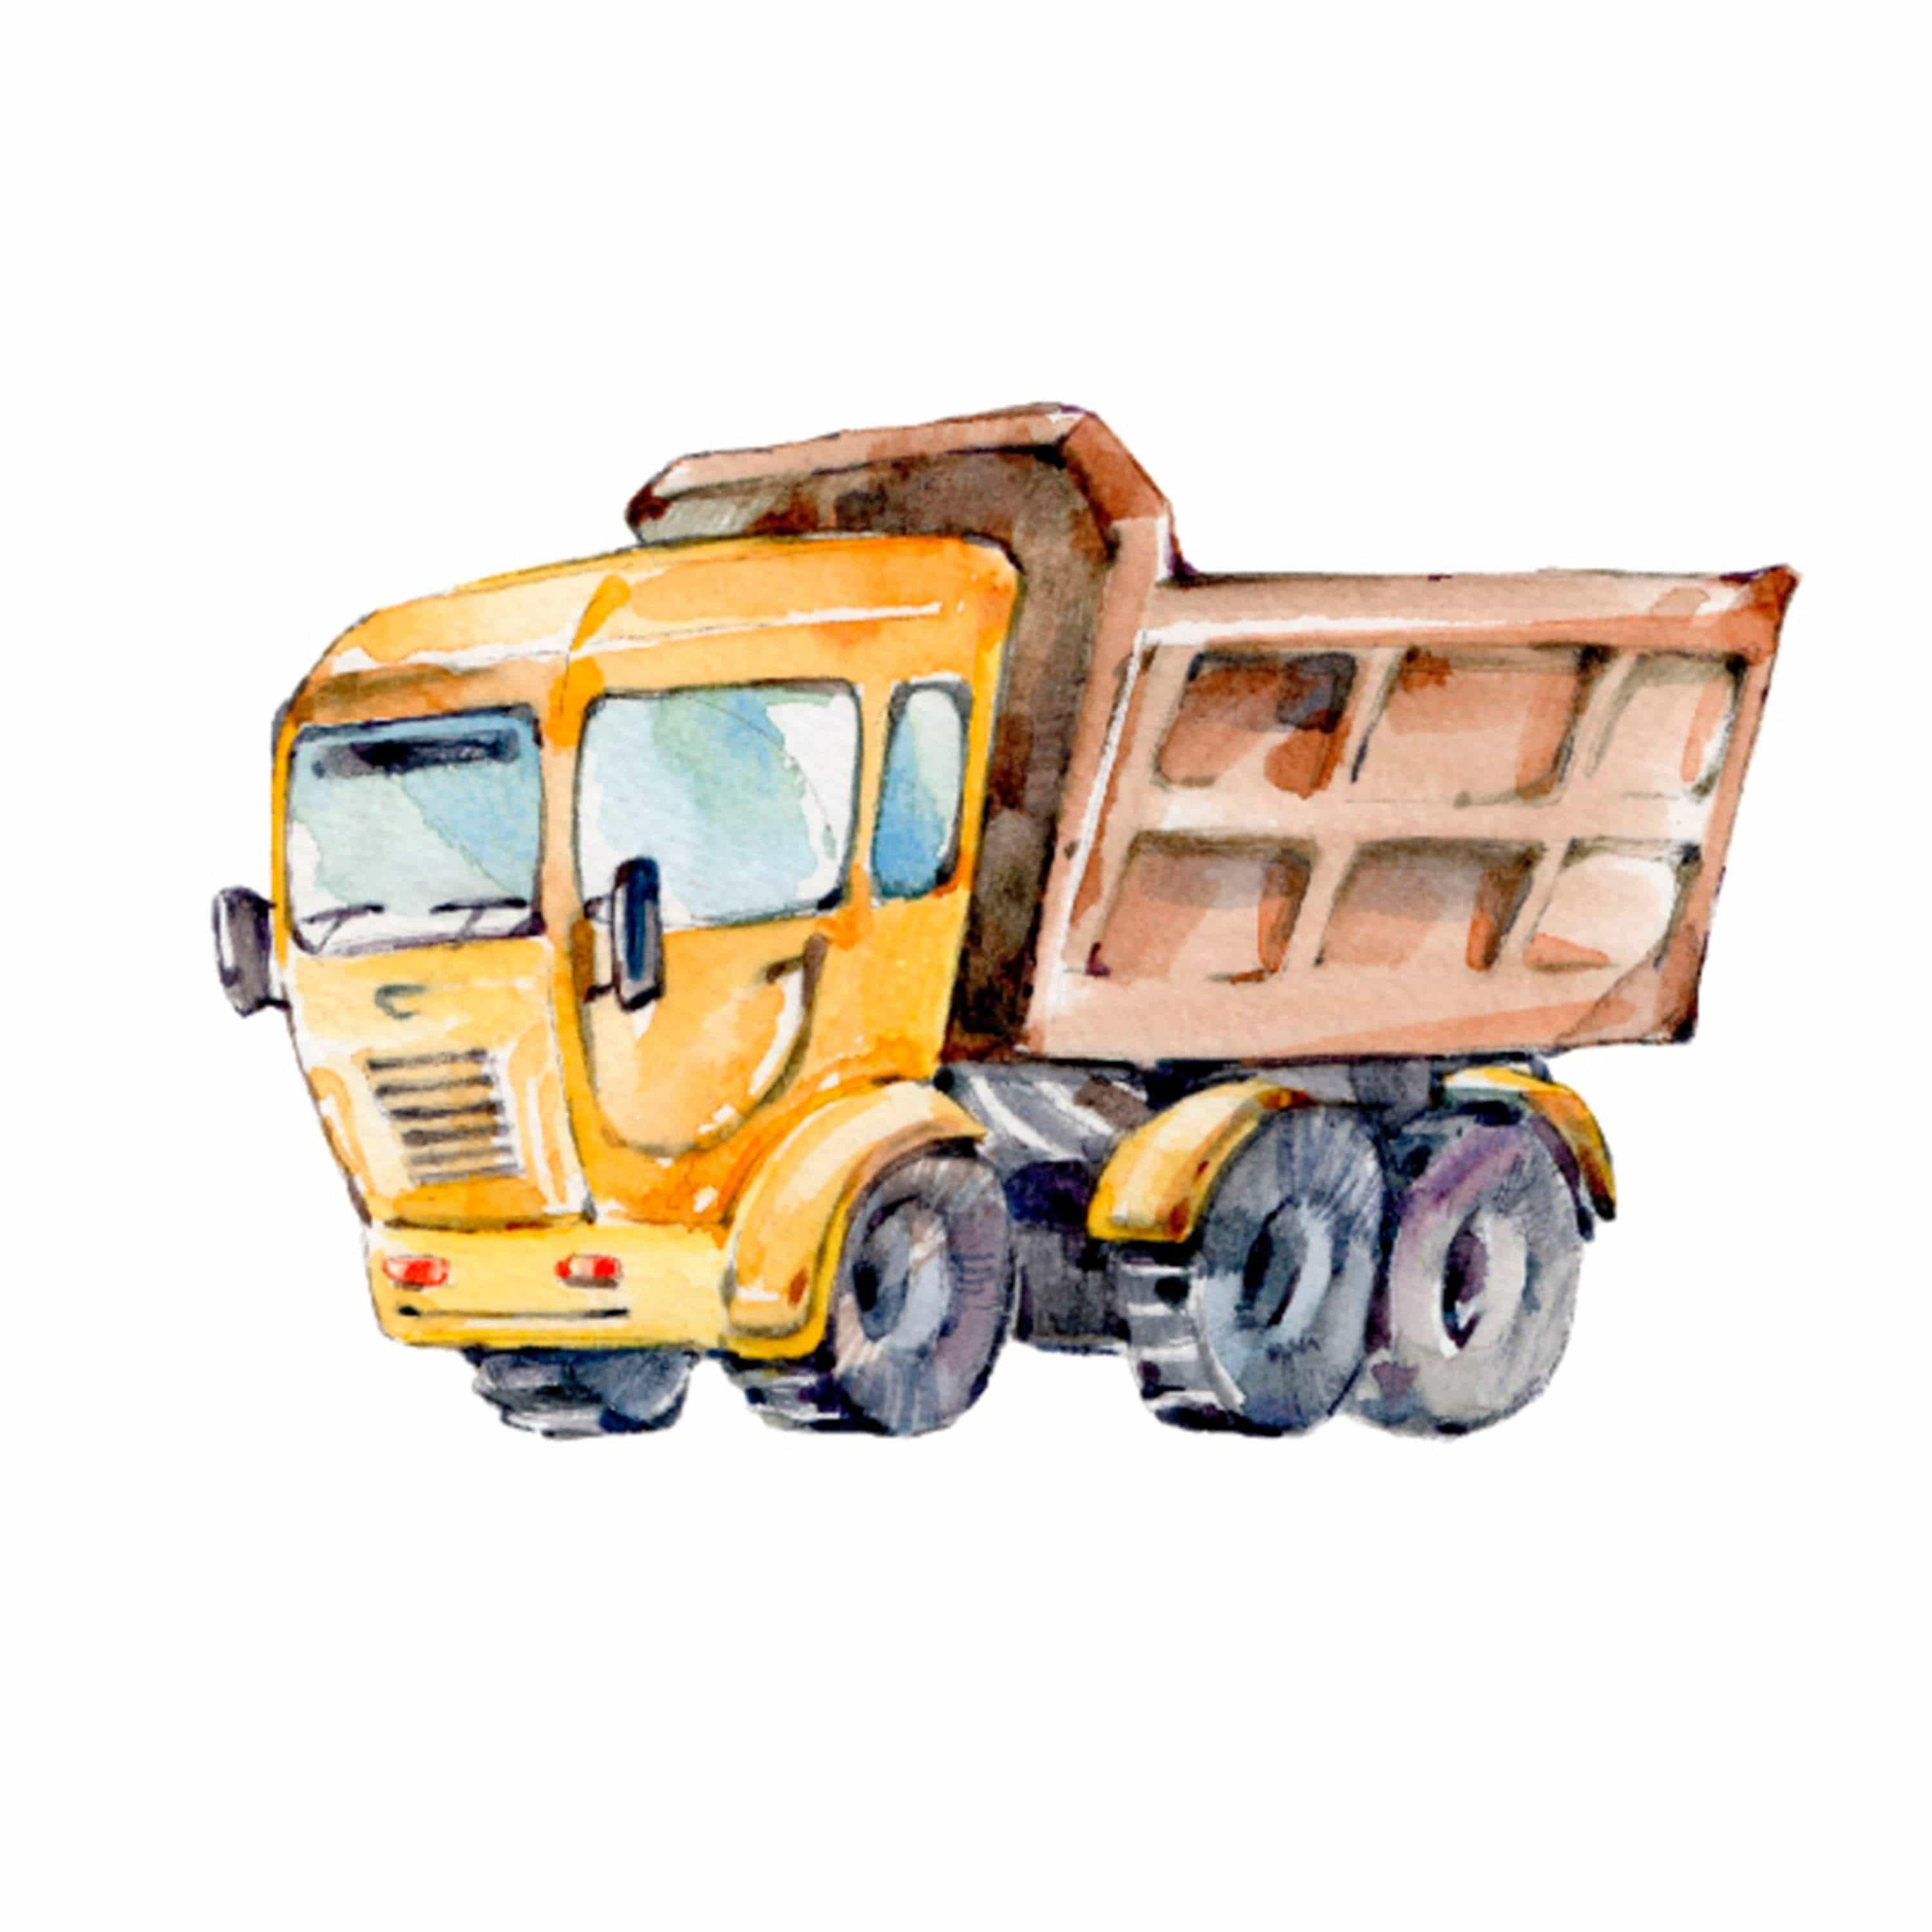 Toy Trucks, Excavator, Tractor, Digger machine Kids removable 28" wallpaper